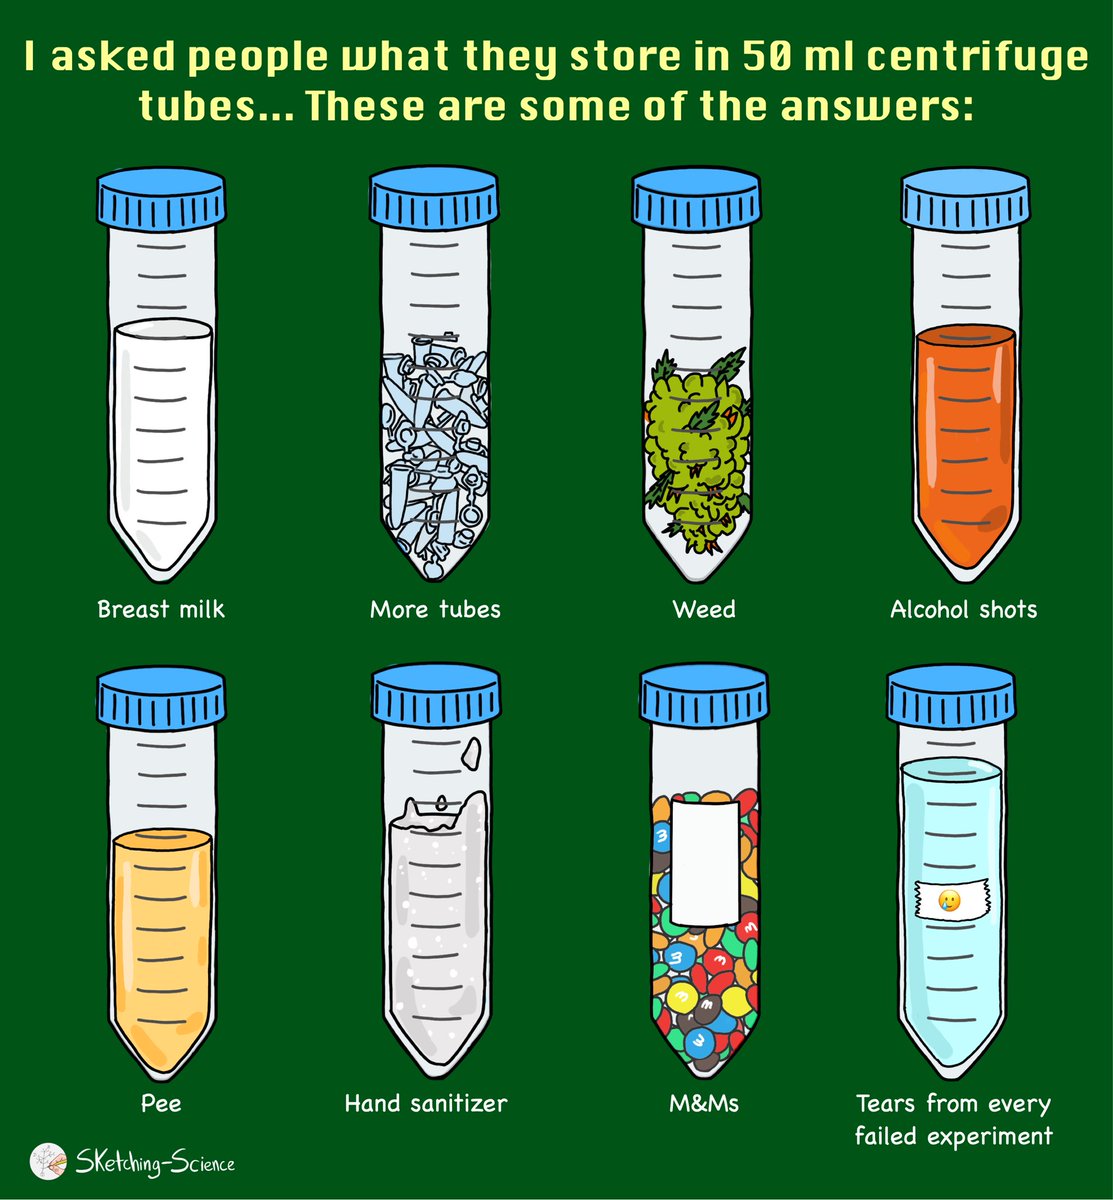 What do you store in 50ml tubes?